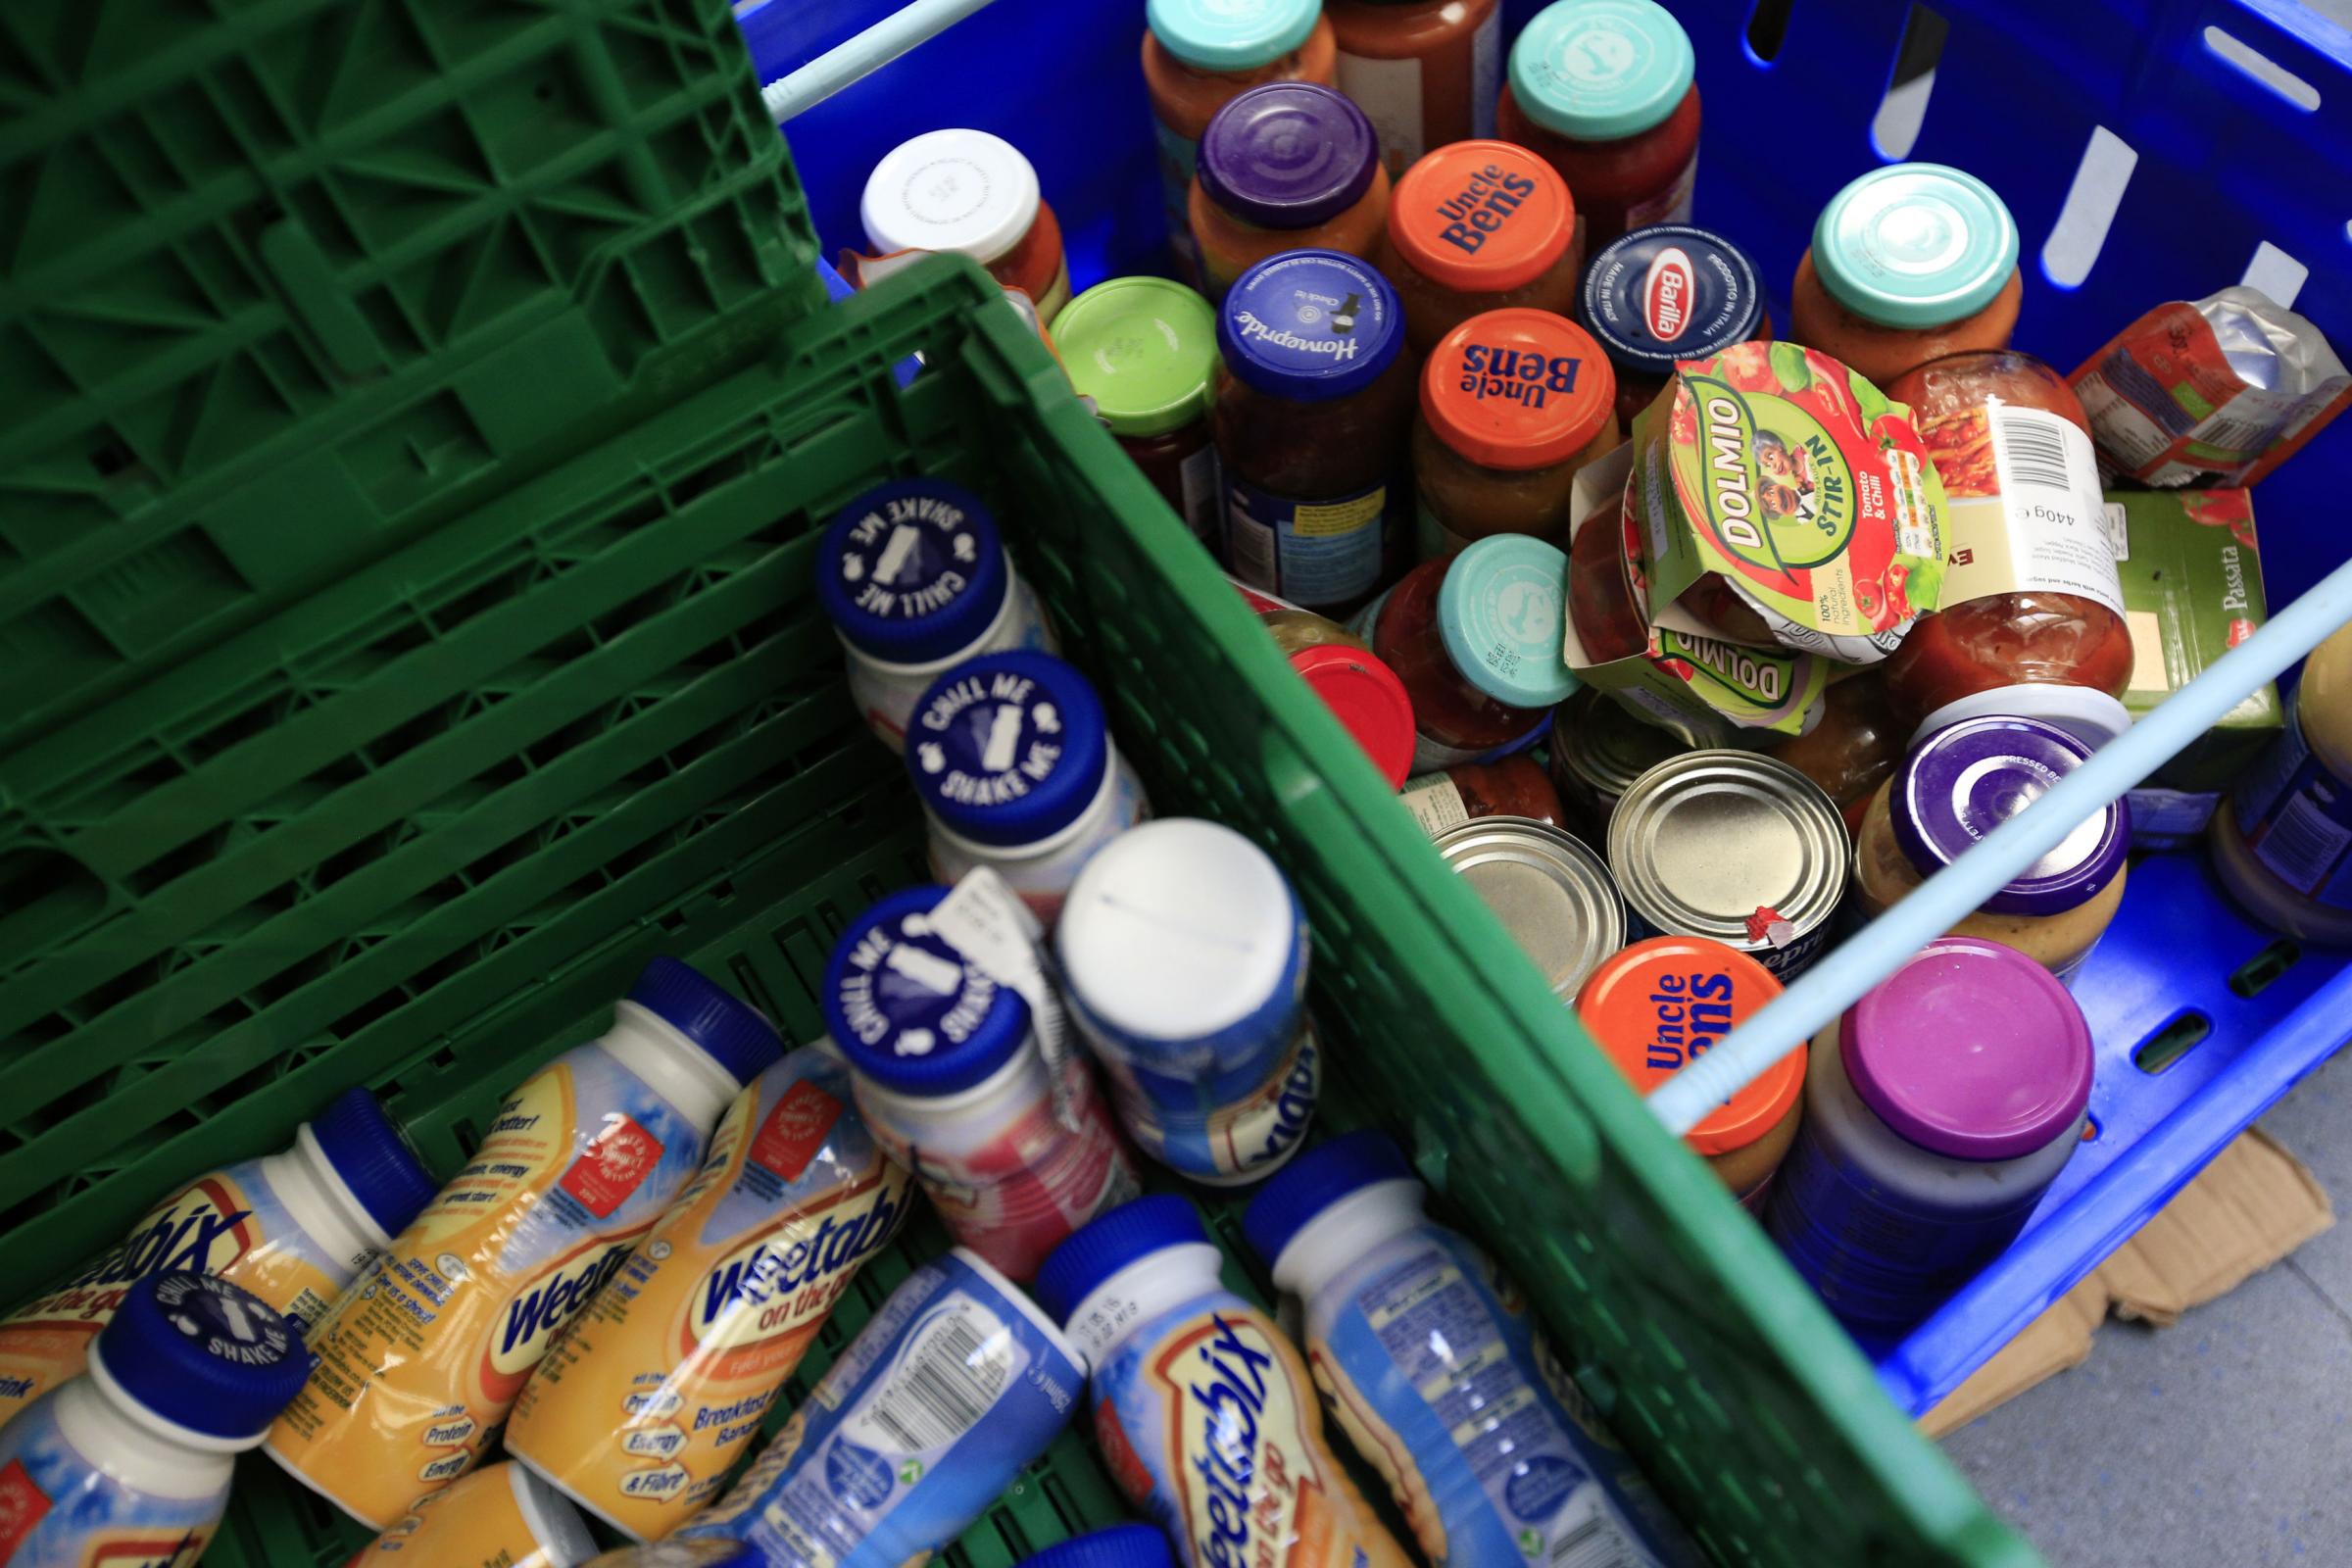 'Surprising' research shows ethnic groups 'unintentionally excluded' from food banks